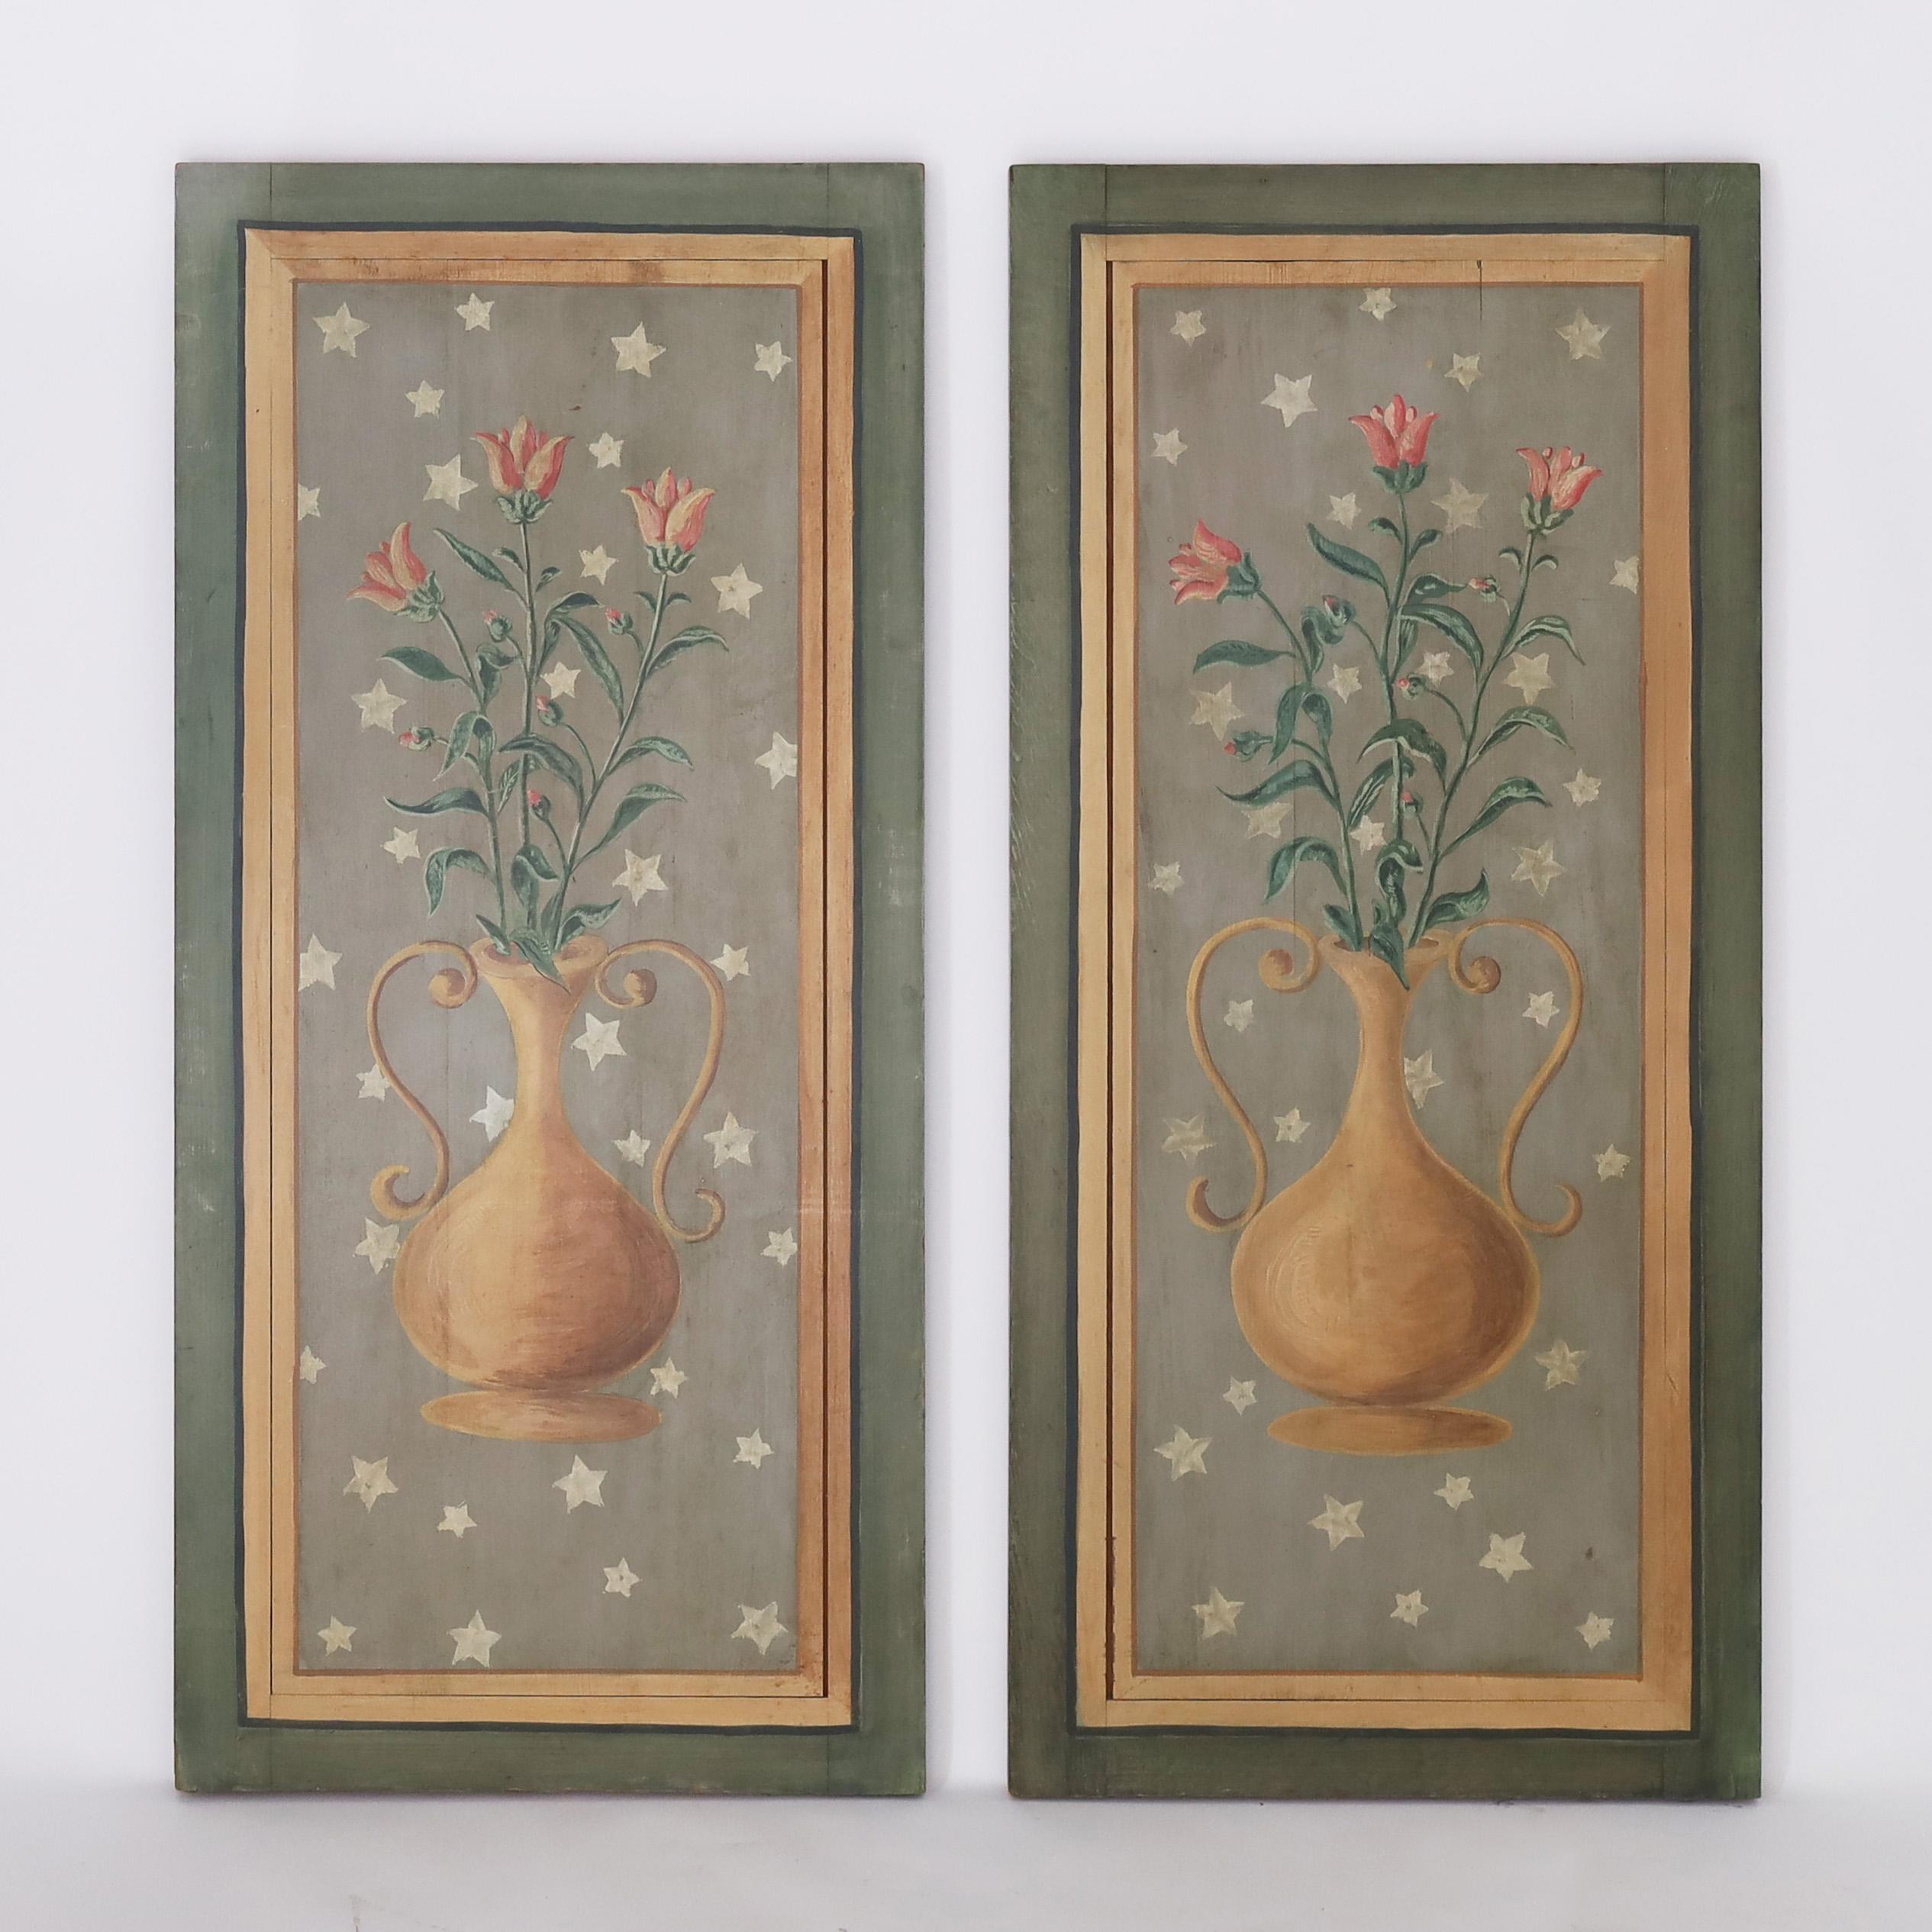 Unknown Still-Life Painting - Pair of Antique Wood Decorative Painted Panels